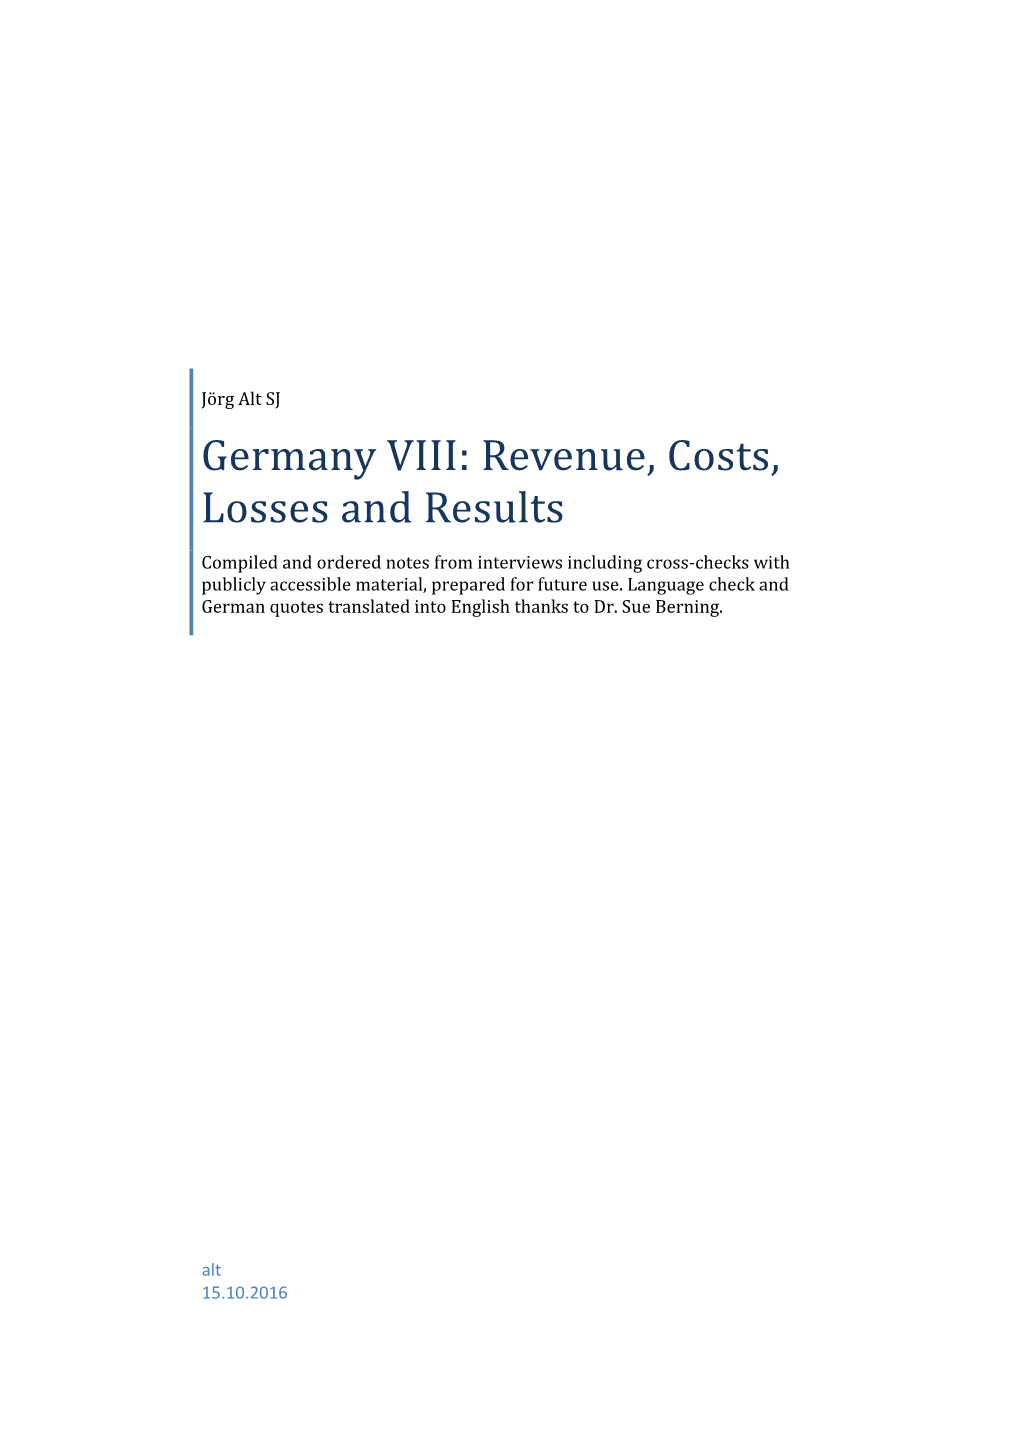 Germany VIII: Revenue, Costs, Losses and Results